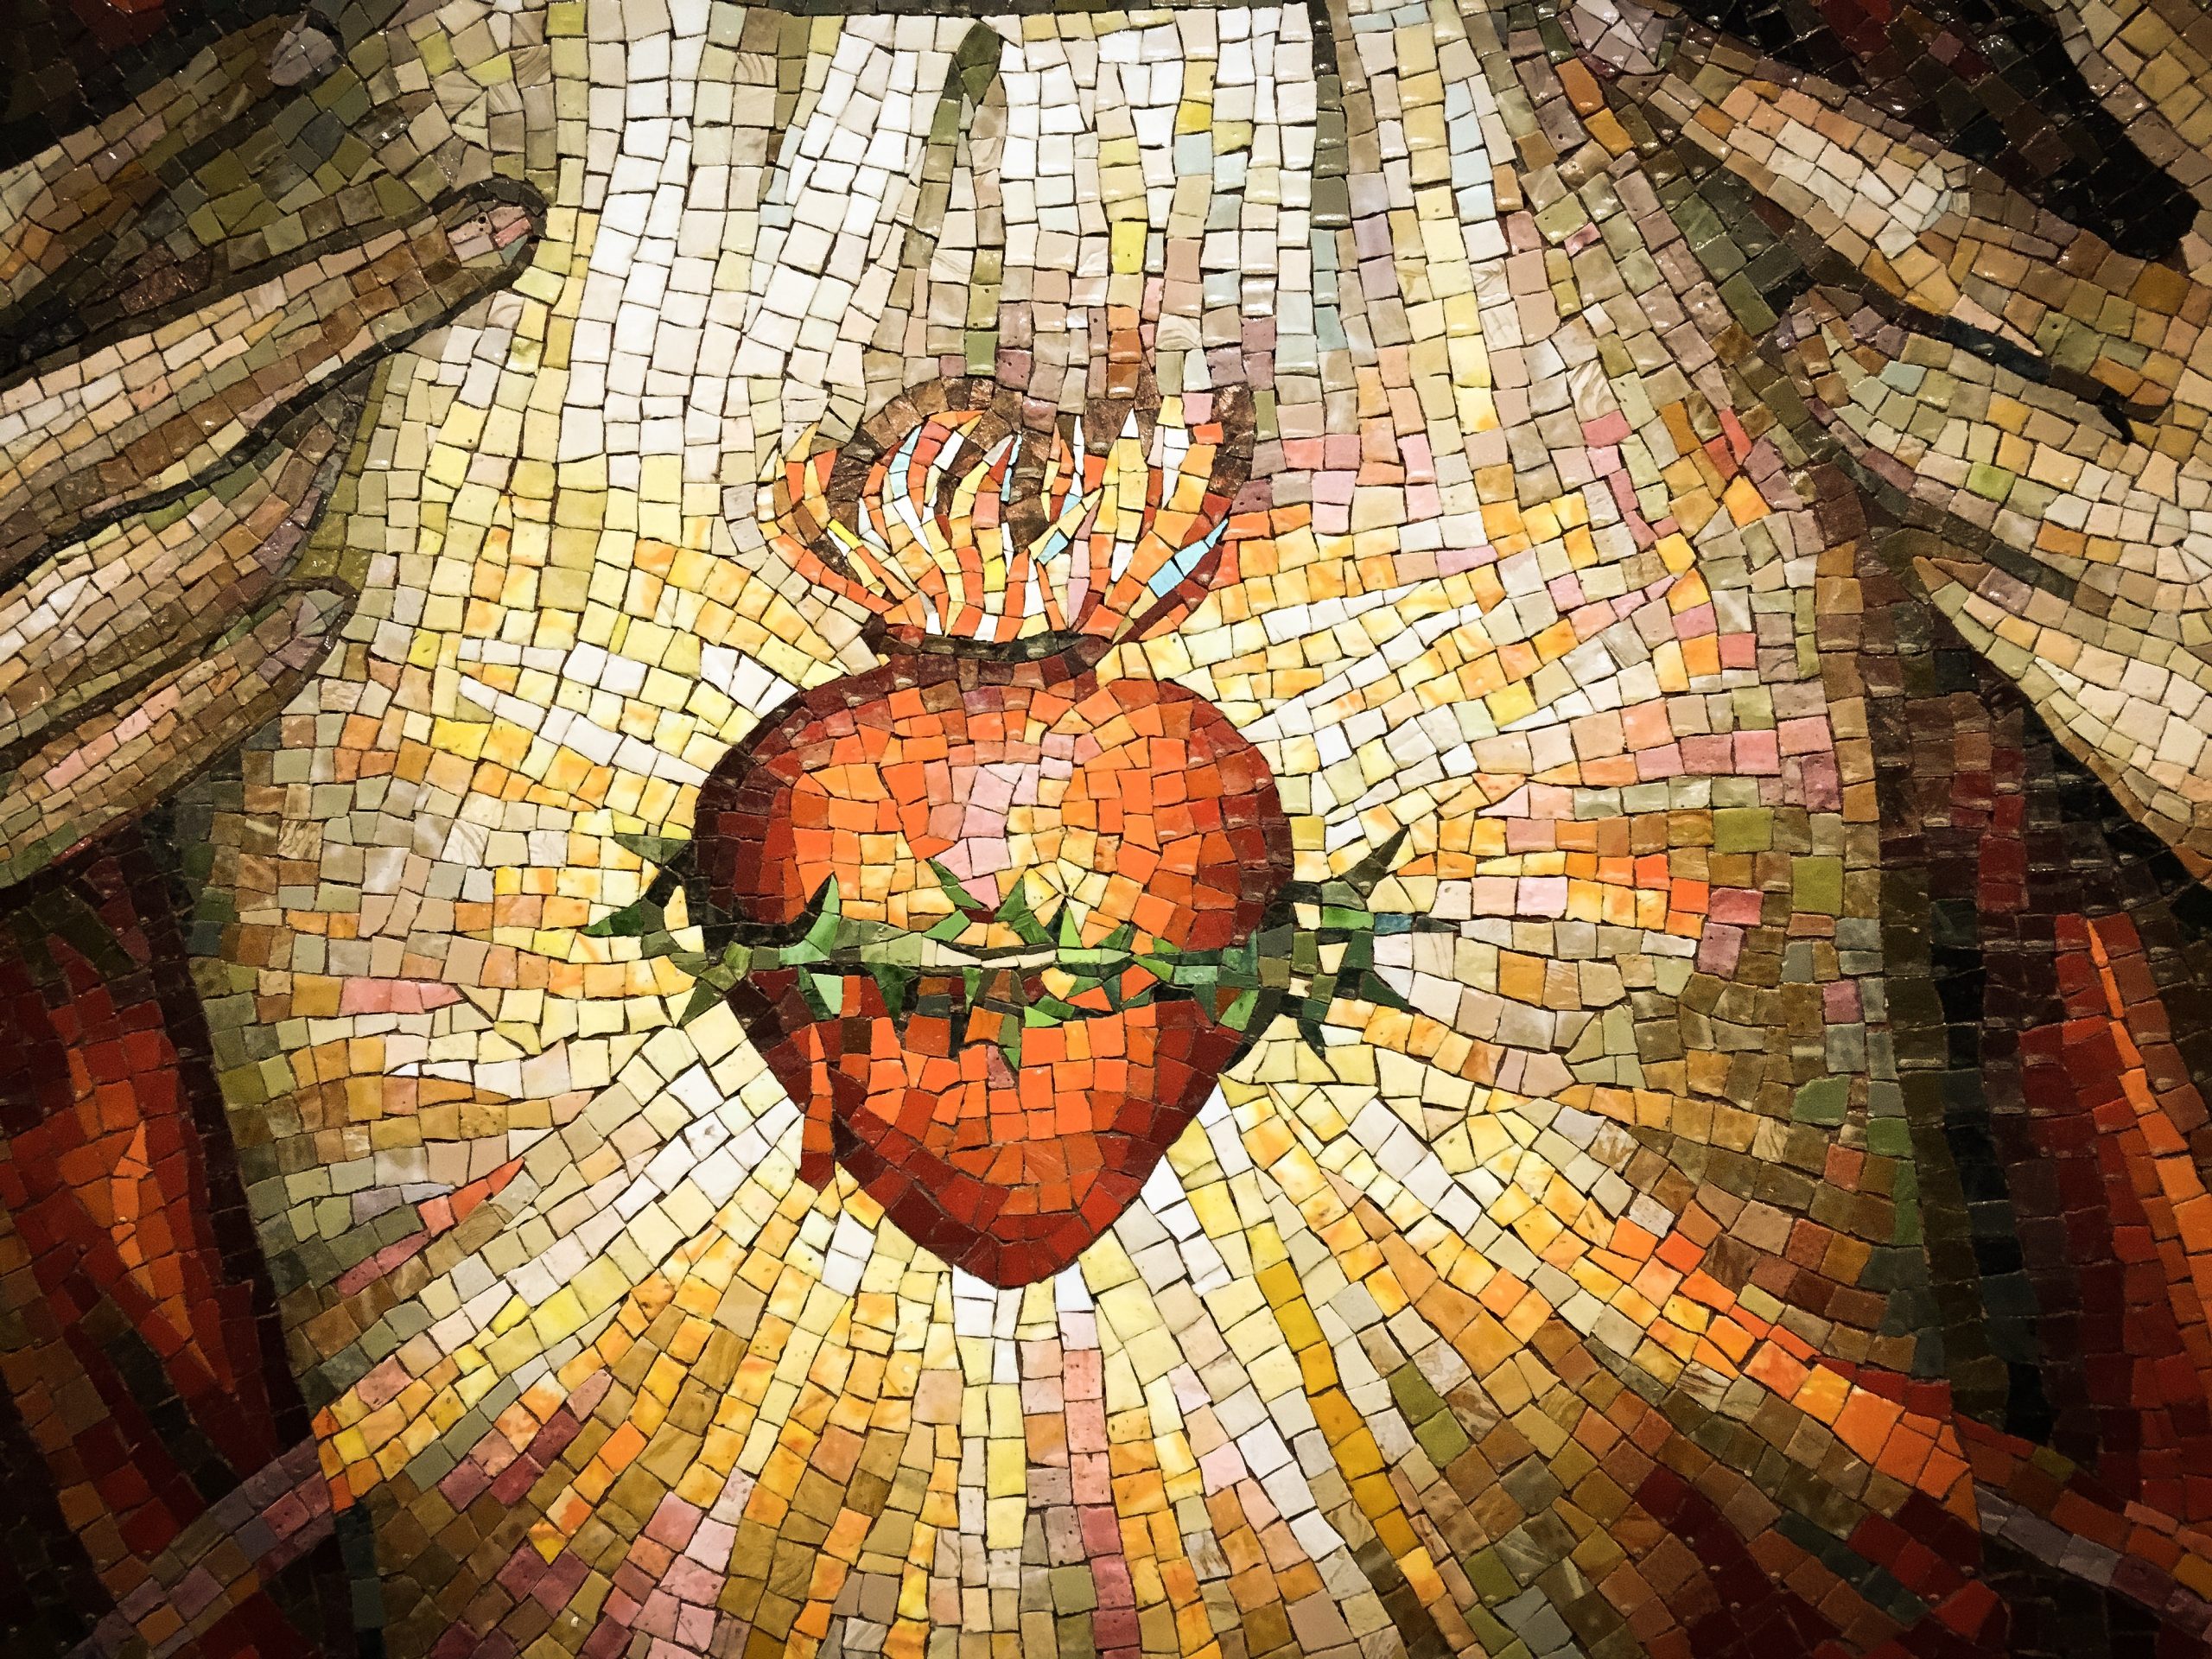 The Sacred Heart: A feast of friendship and an answer to loneliness